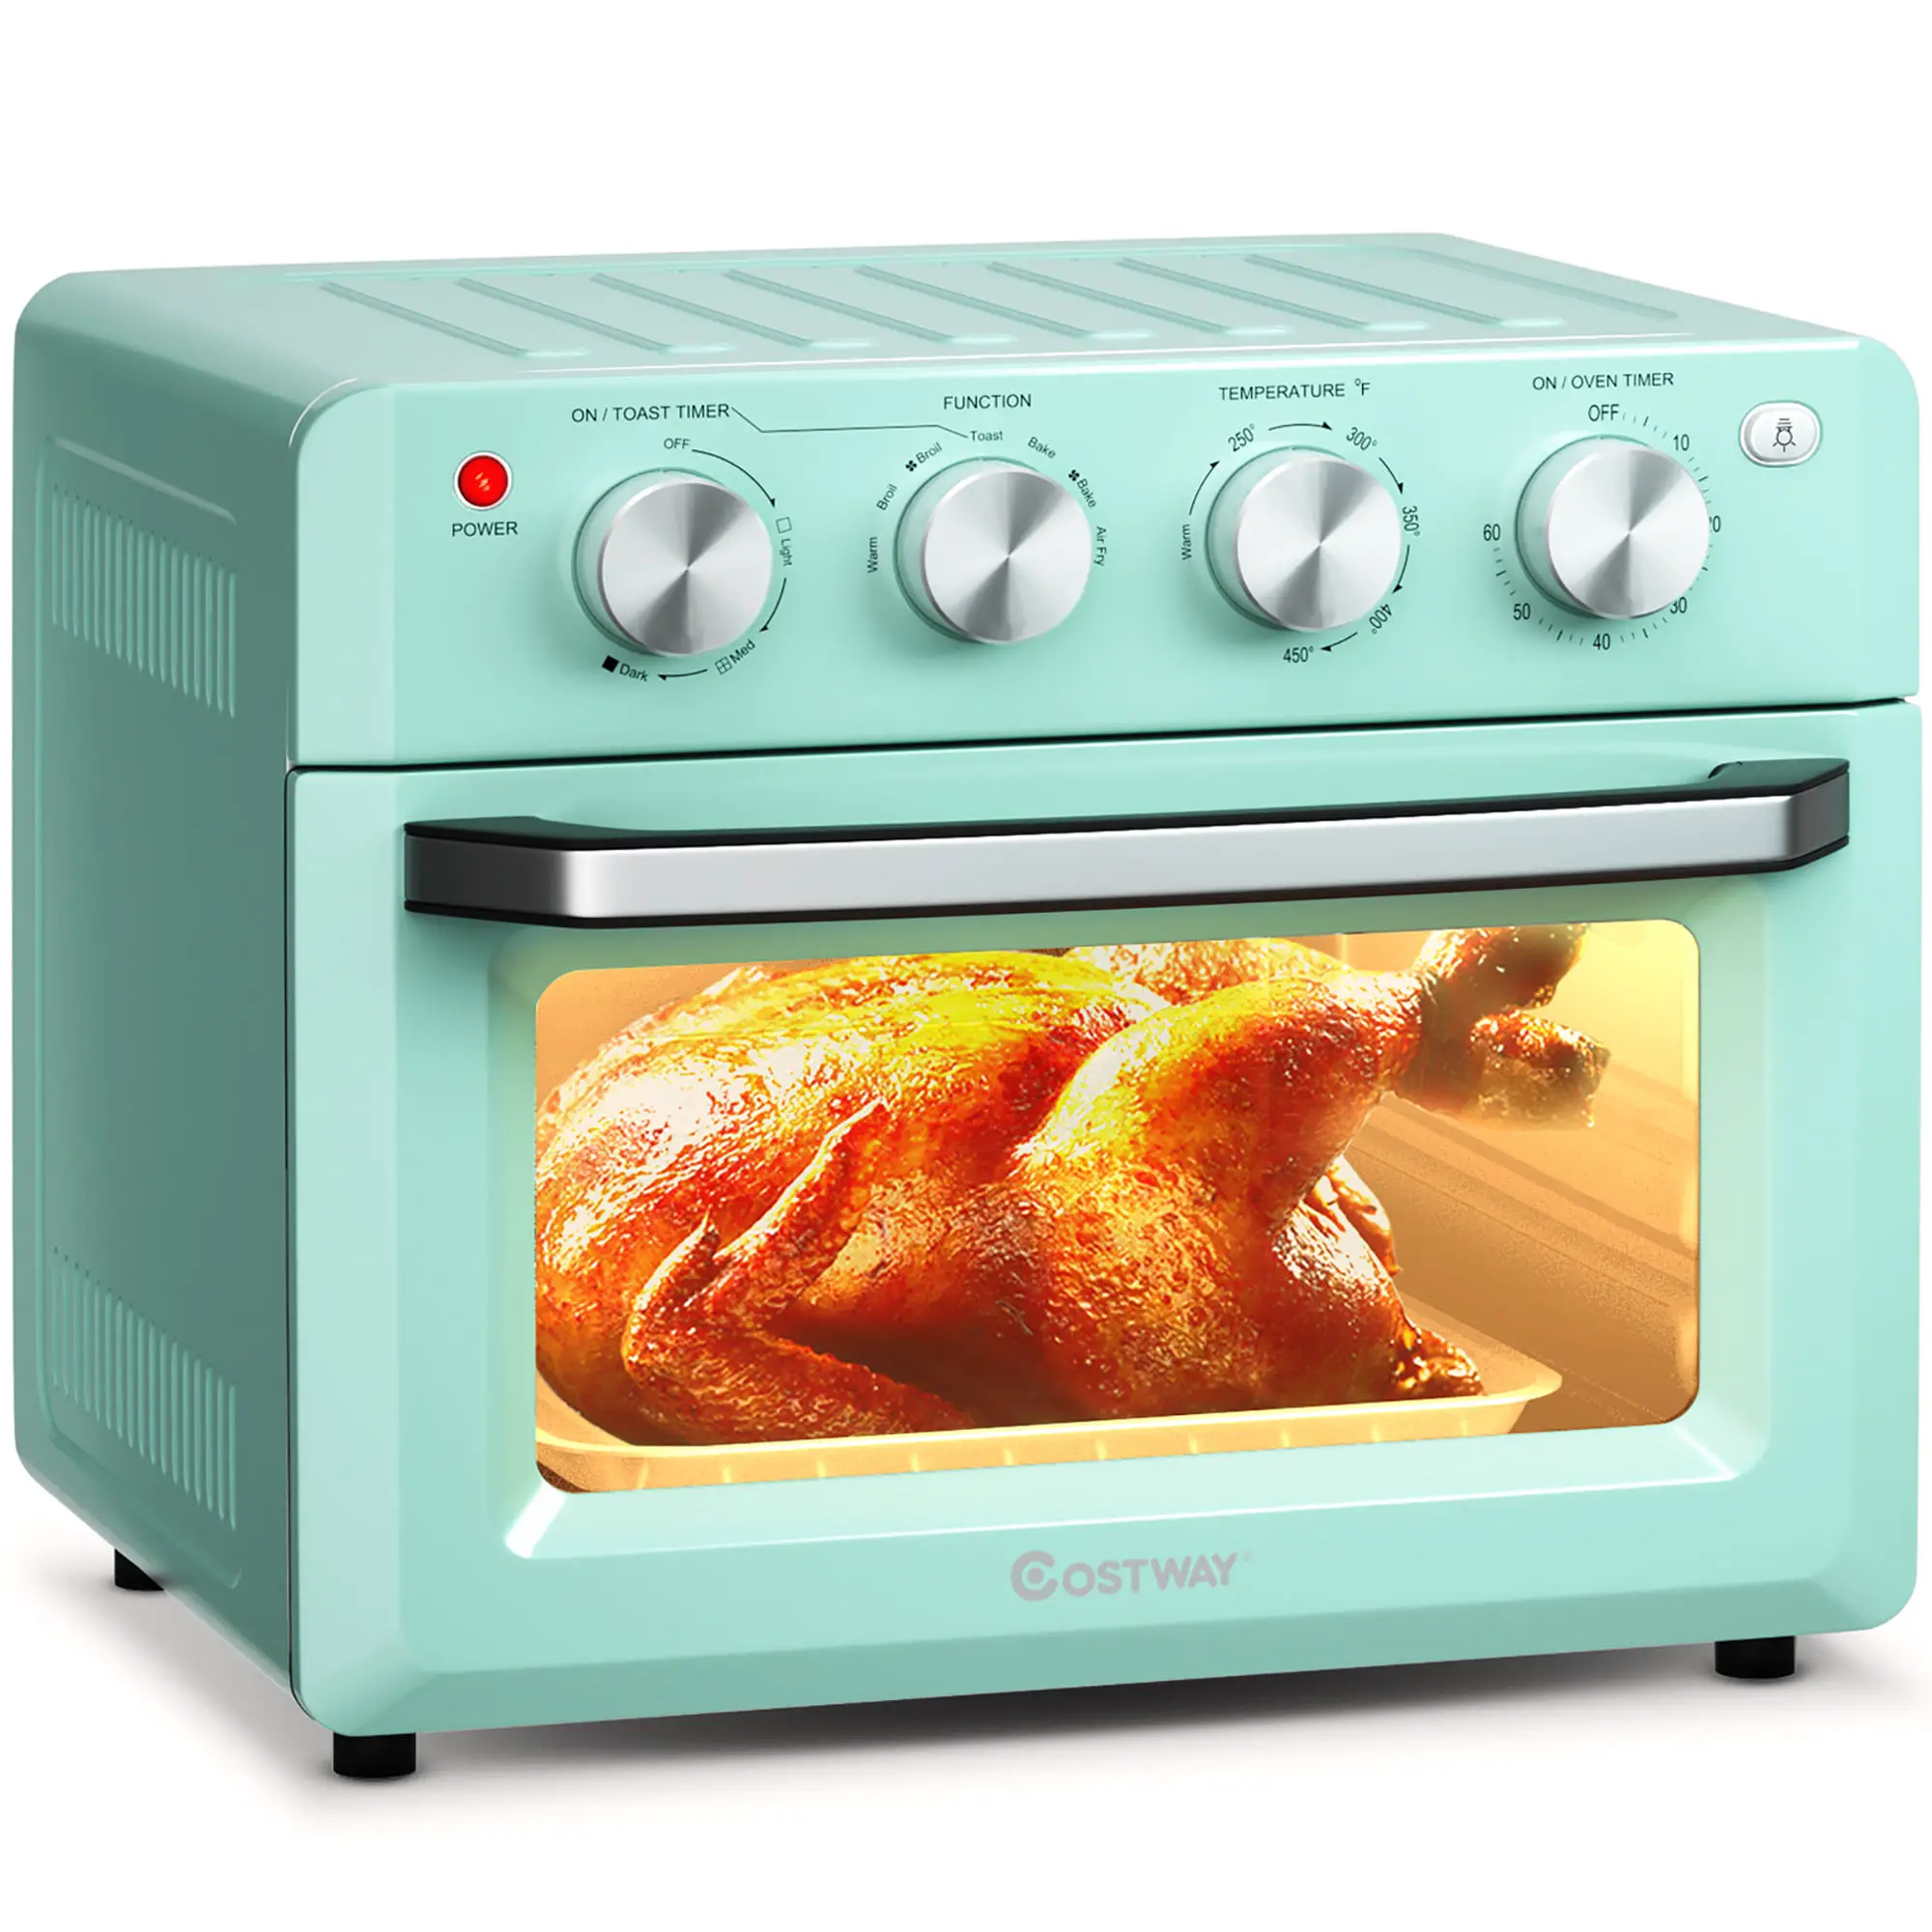 Costway Air Fryer Toaster Oven 19 QT Dehydrate Convection Ovens w/ 5 ...